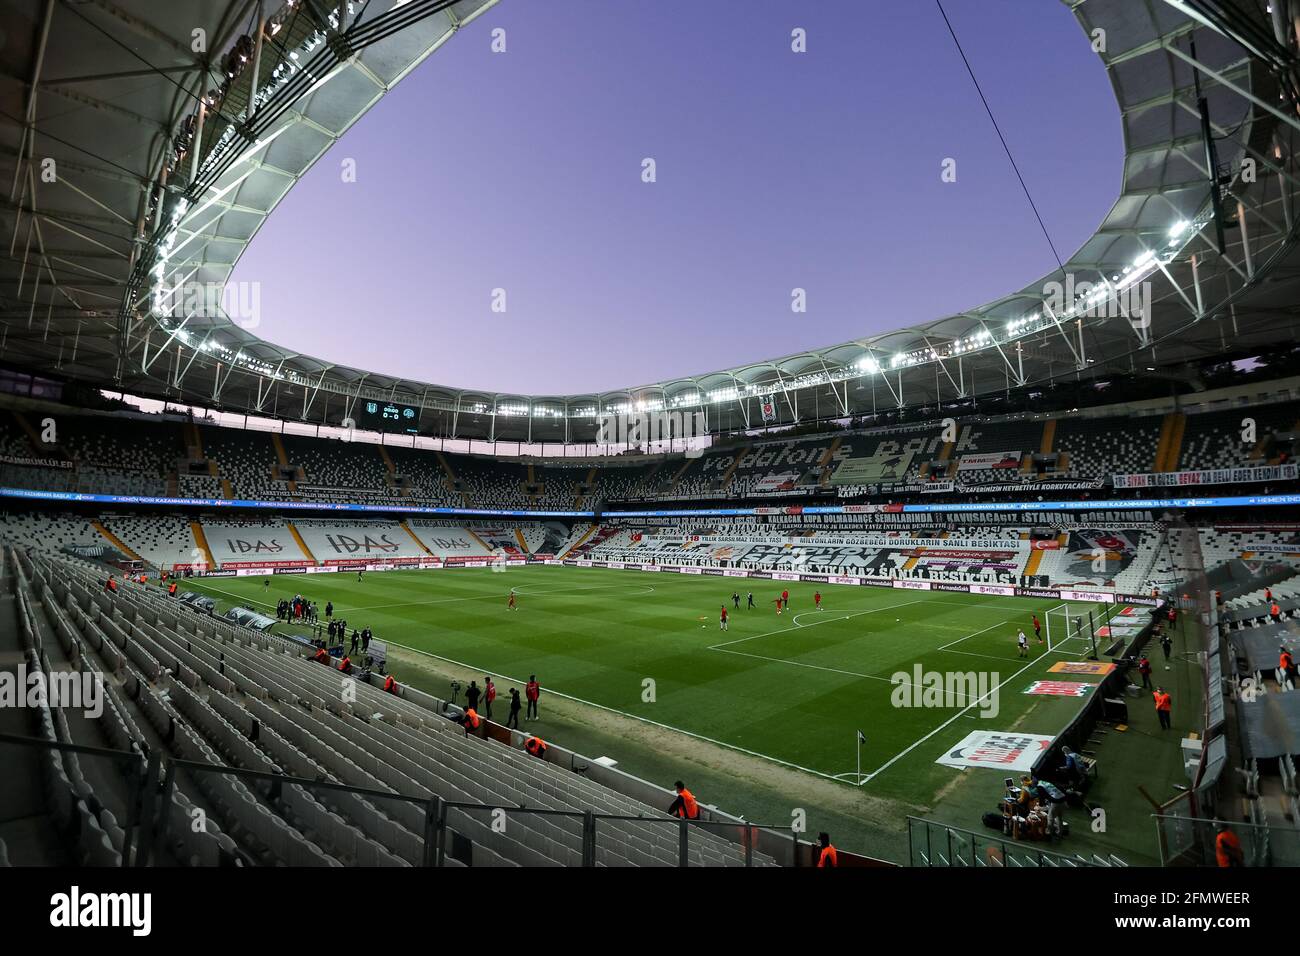 Istanbul Turkey May 11 General View Of Vodafone Park Home Stadium Of Besiktas During The Super